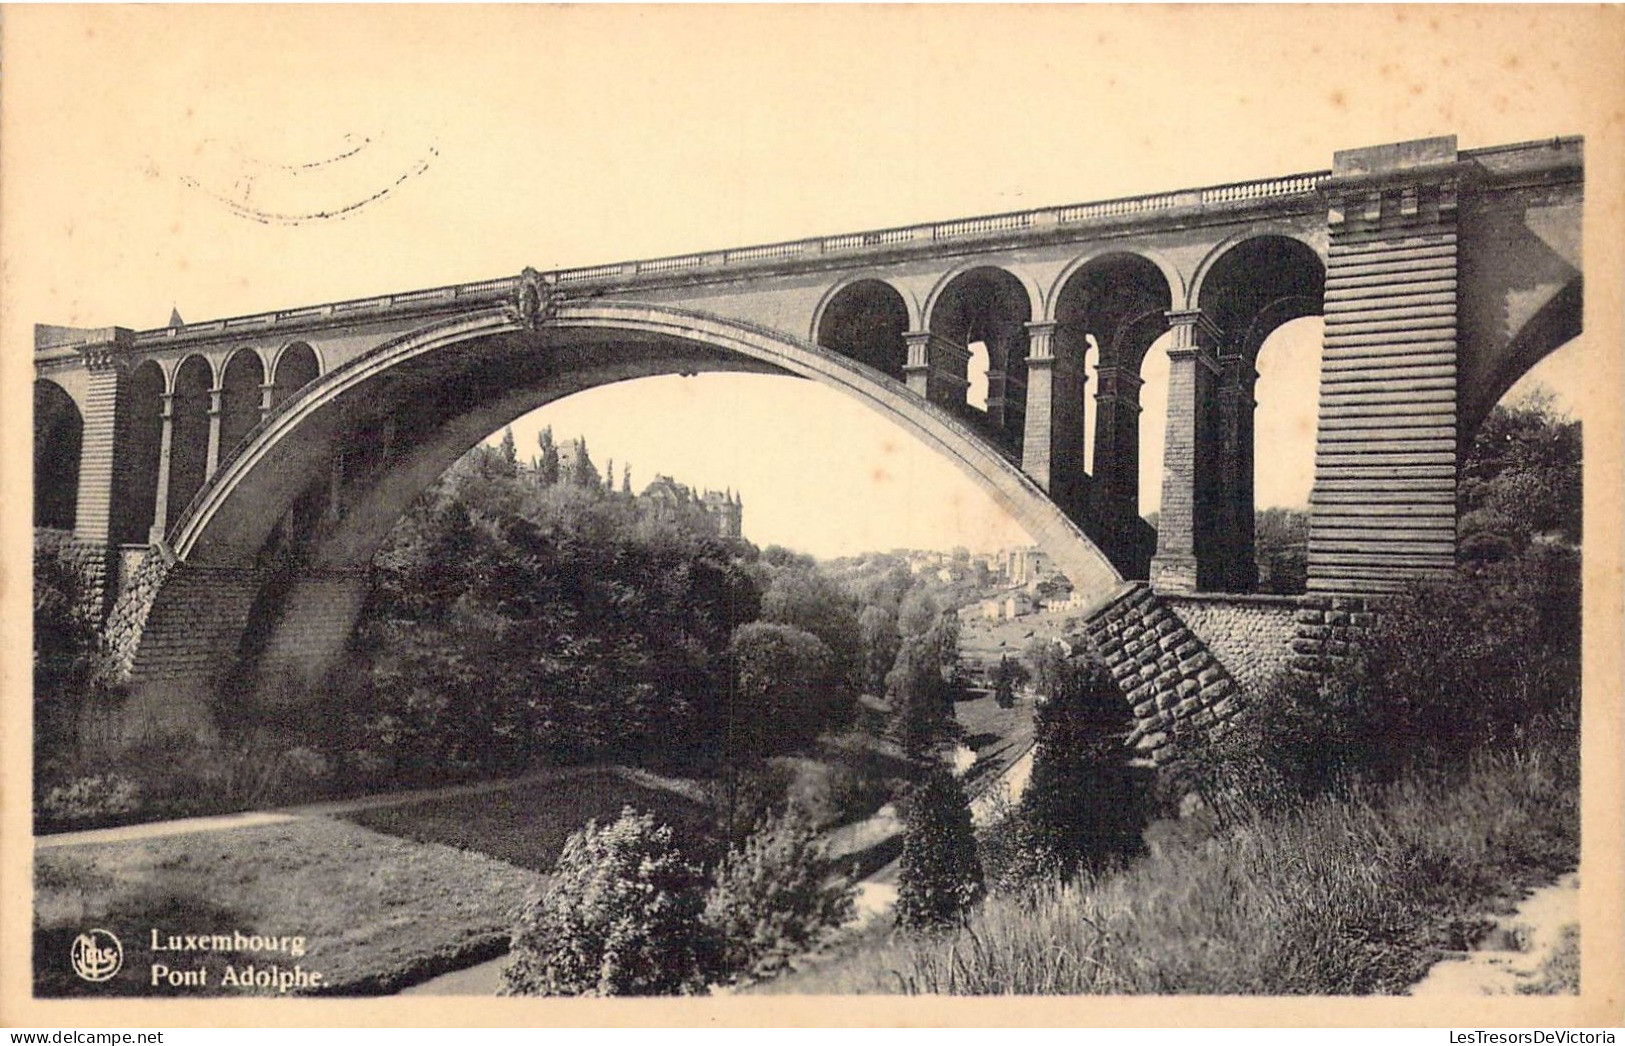 LUXEMBOURG - Ville - Pont Adolphe - Carte Postale Ancienne - Luxemburg - Stadt